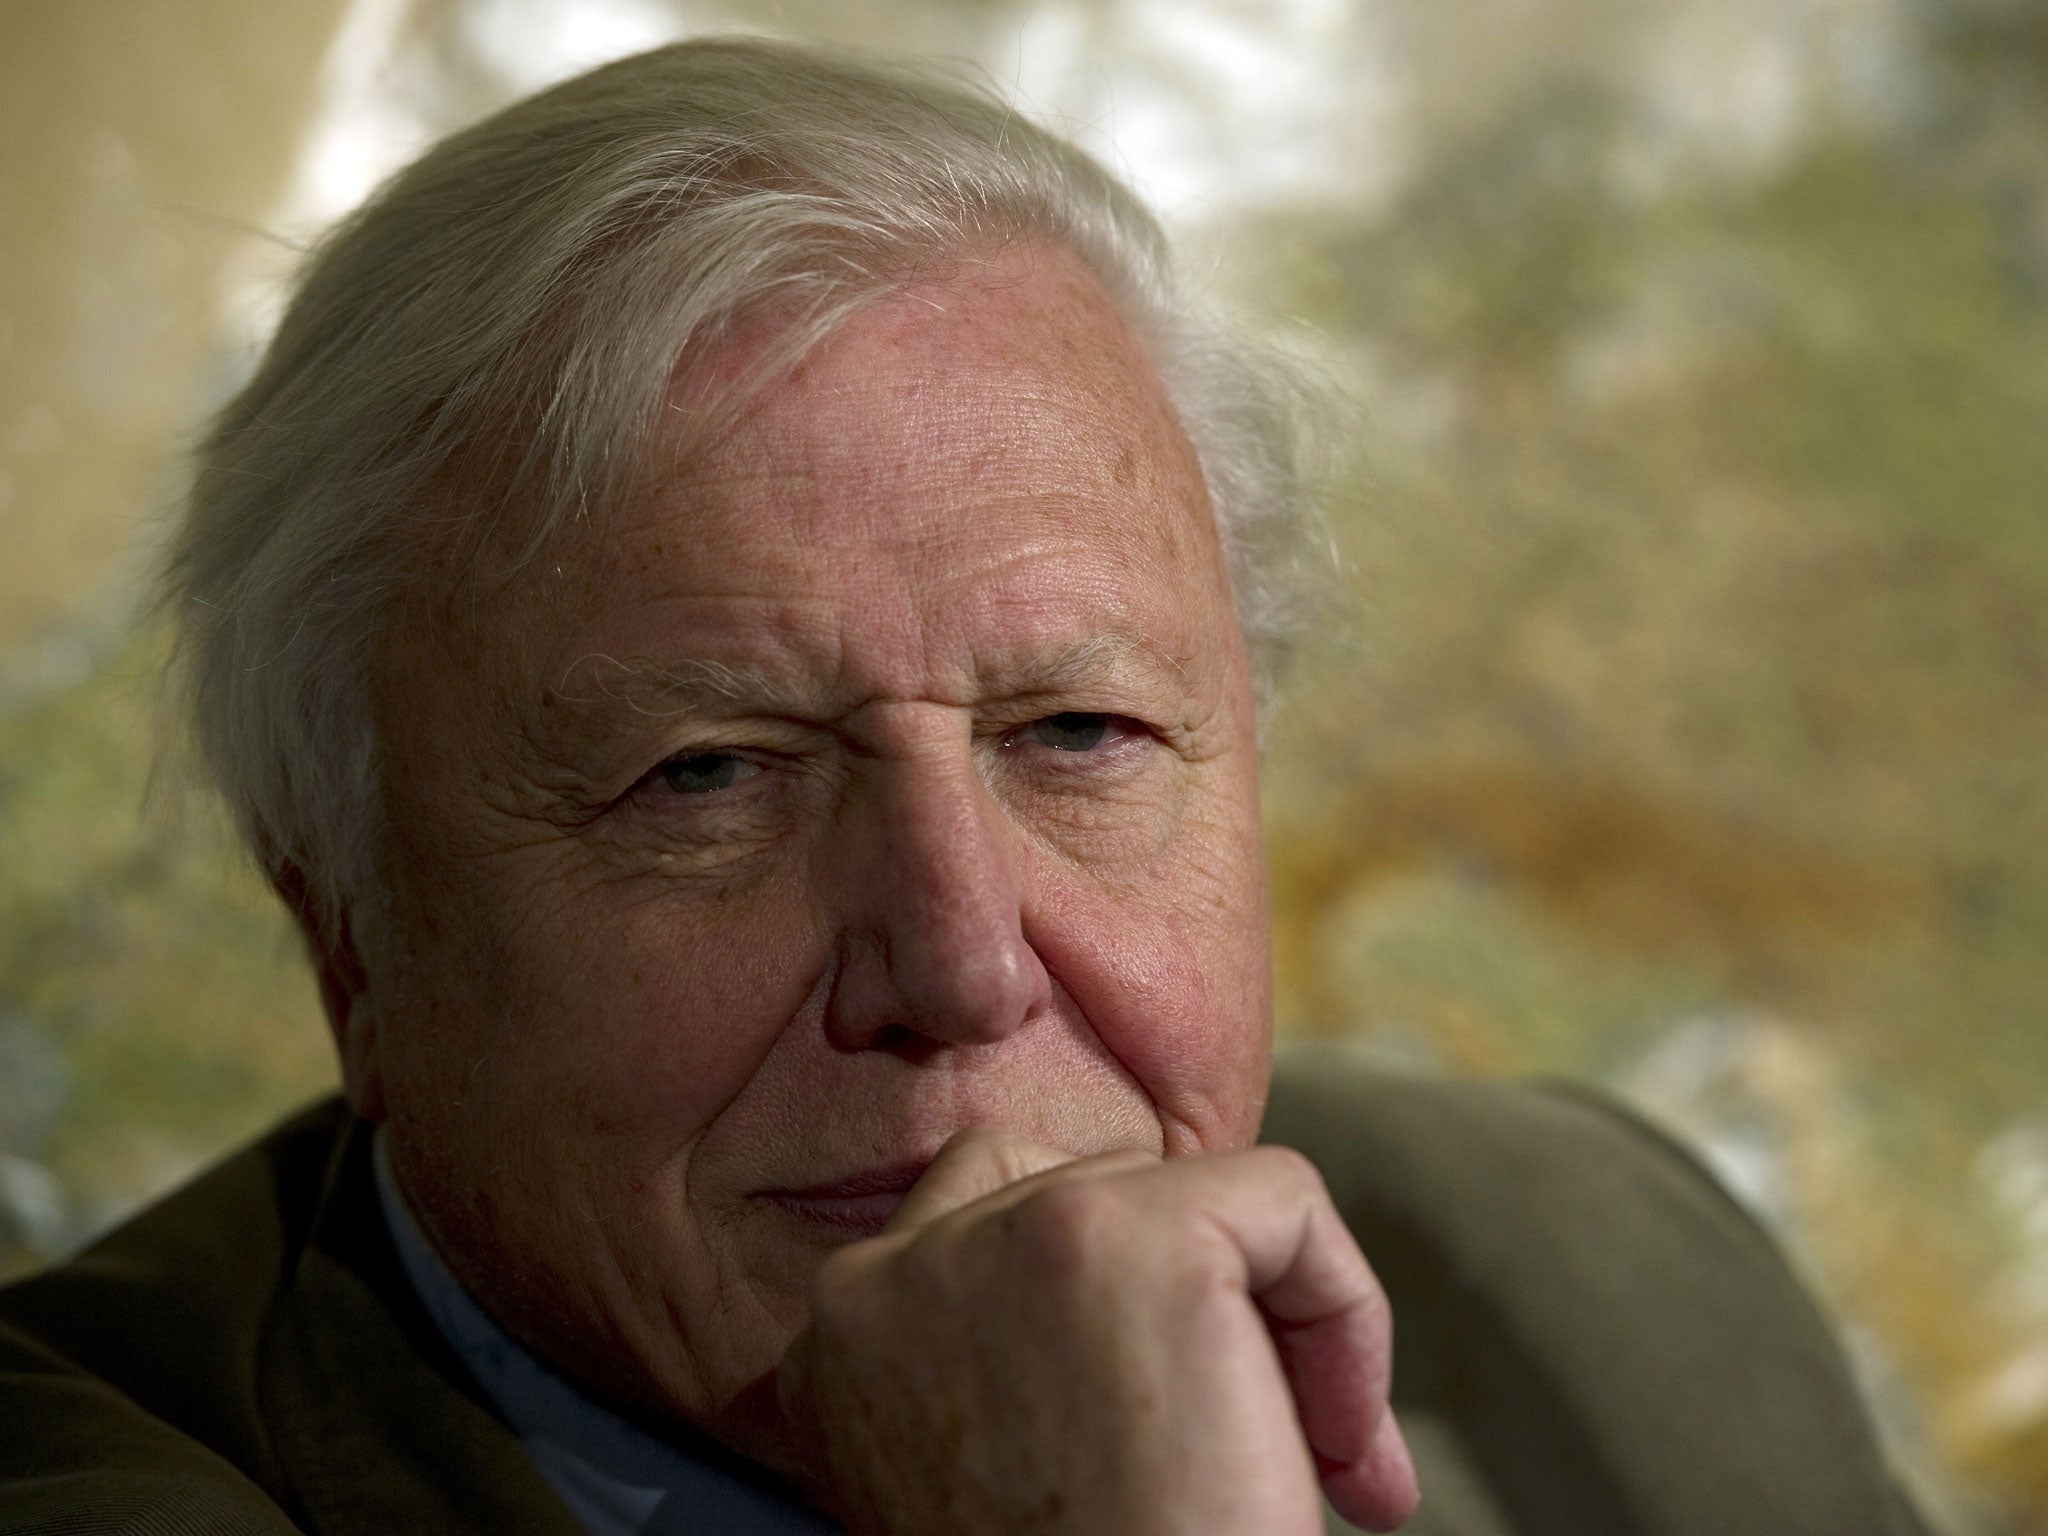 Sir David Attenborough: Believes wolves have been unfairly demonised